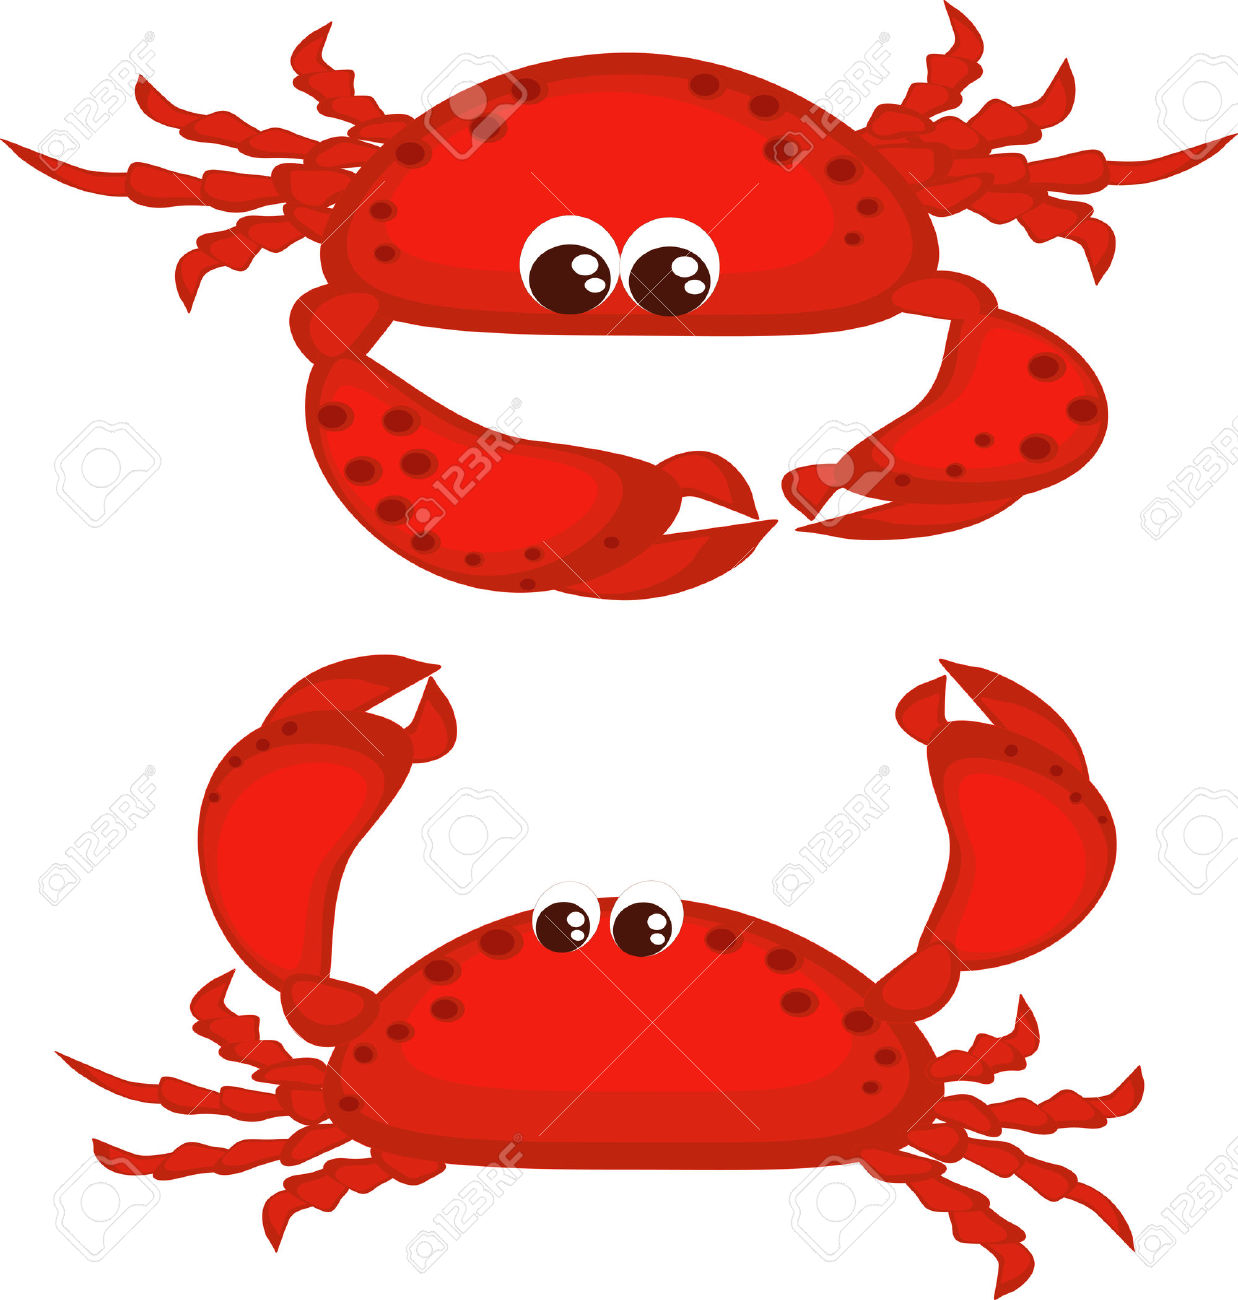 Crustacean red pencil and. 2 clipart crab